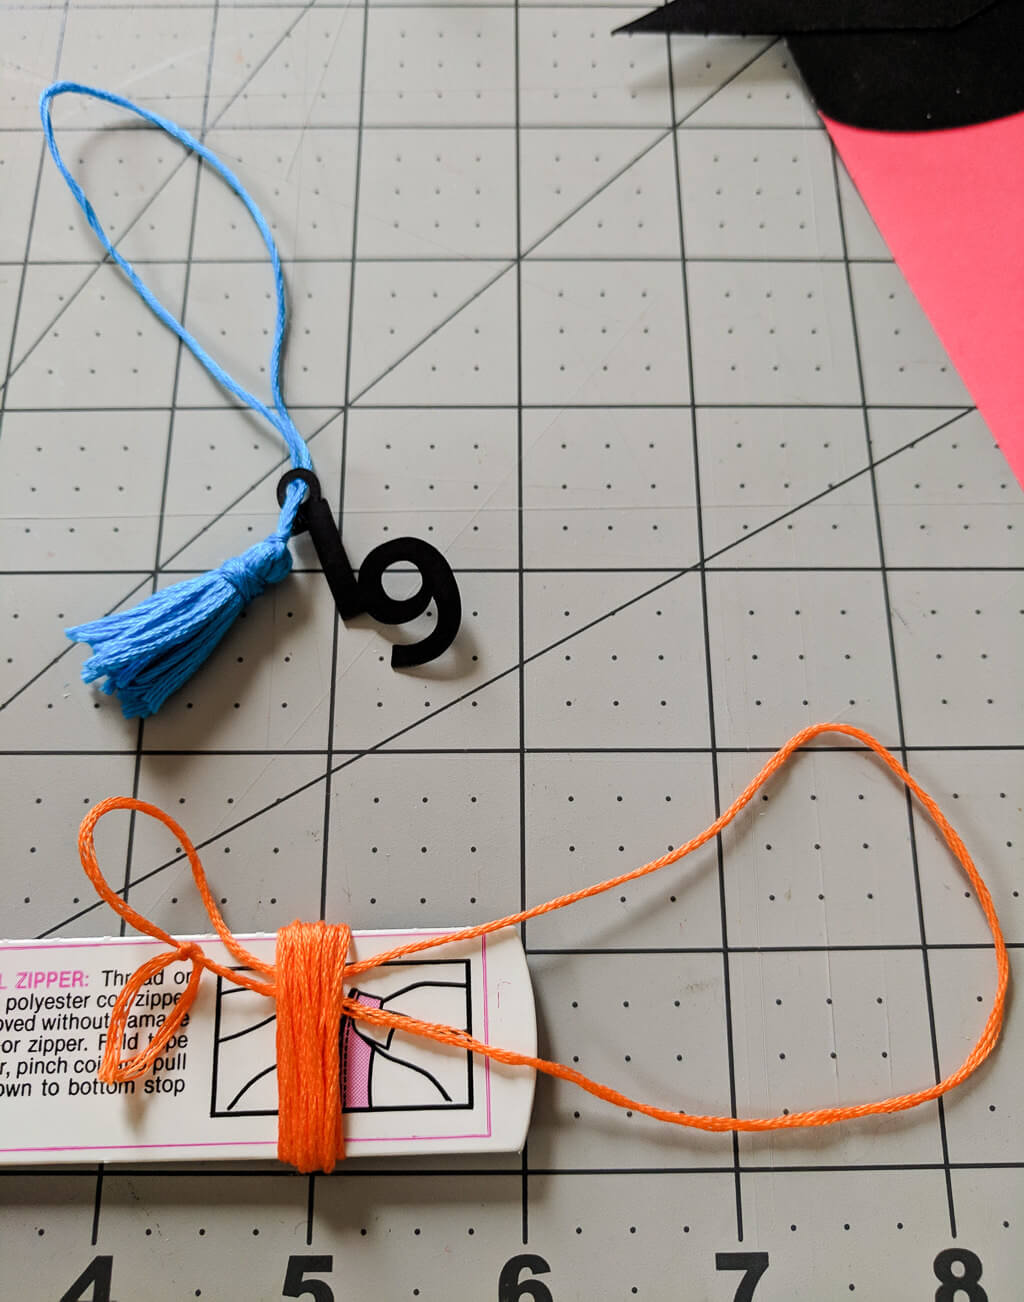 Making DIY tassels from embroidery floss